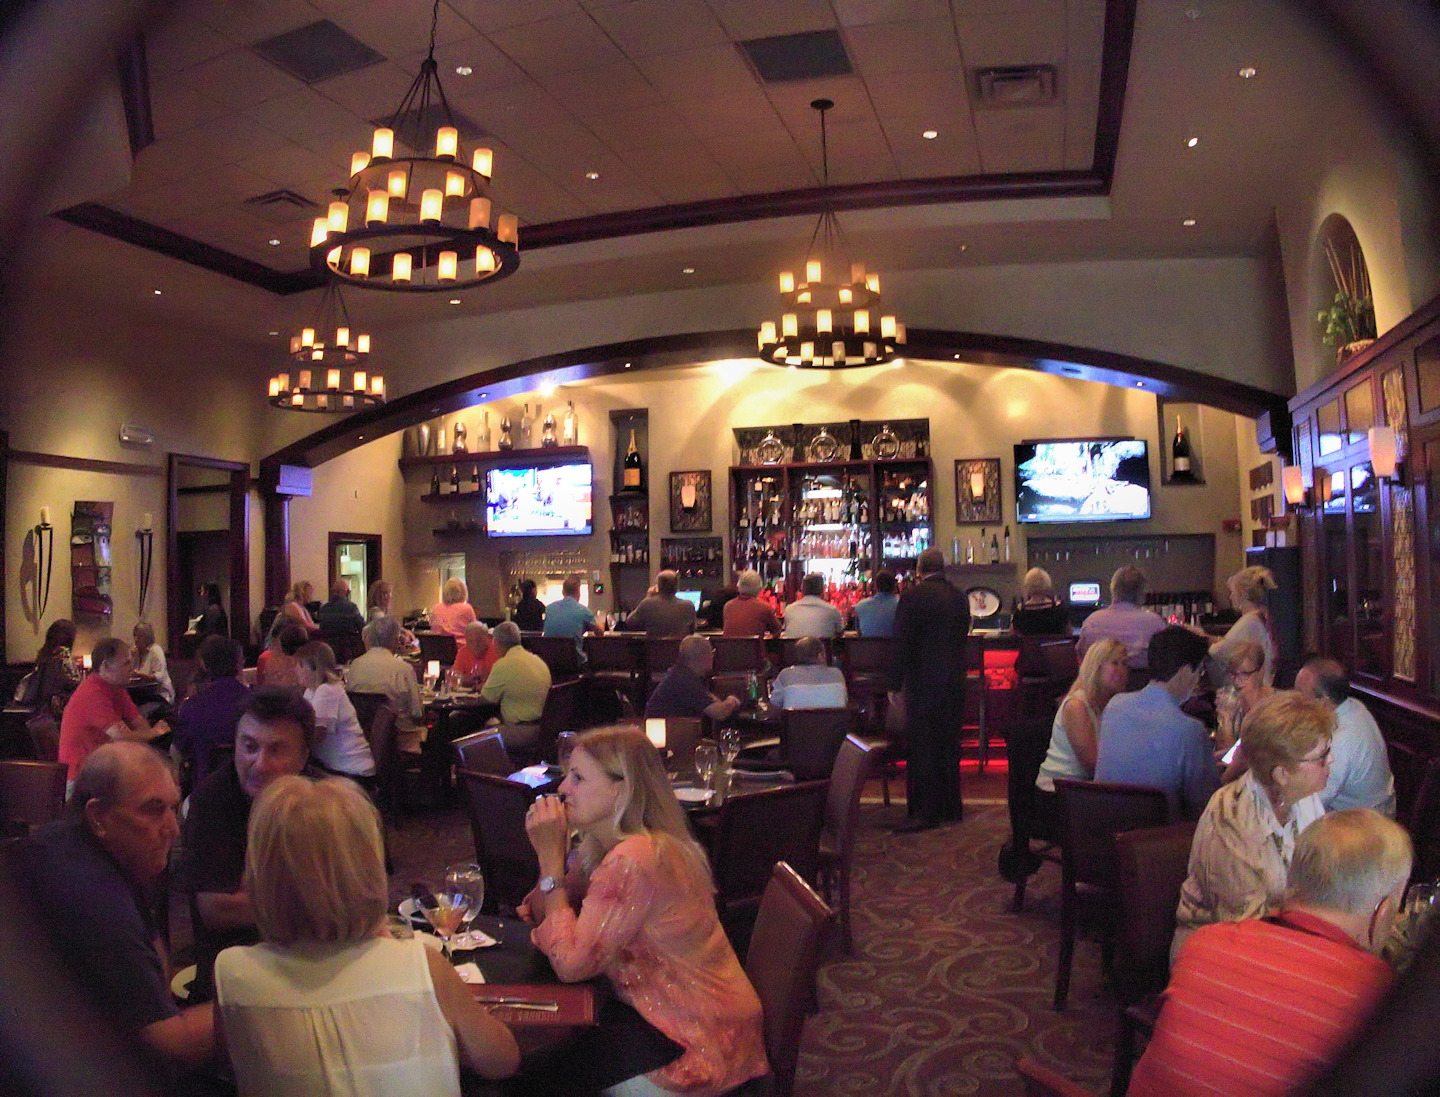 Southwest Florida Forks: Happy Hour Again at Ruth's Chris ...